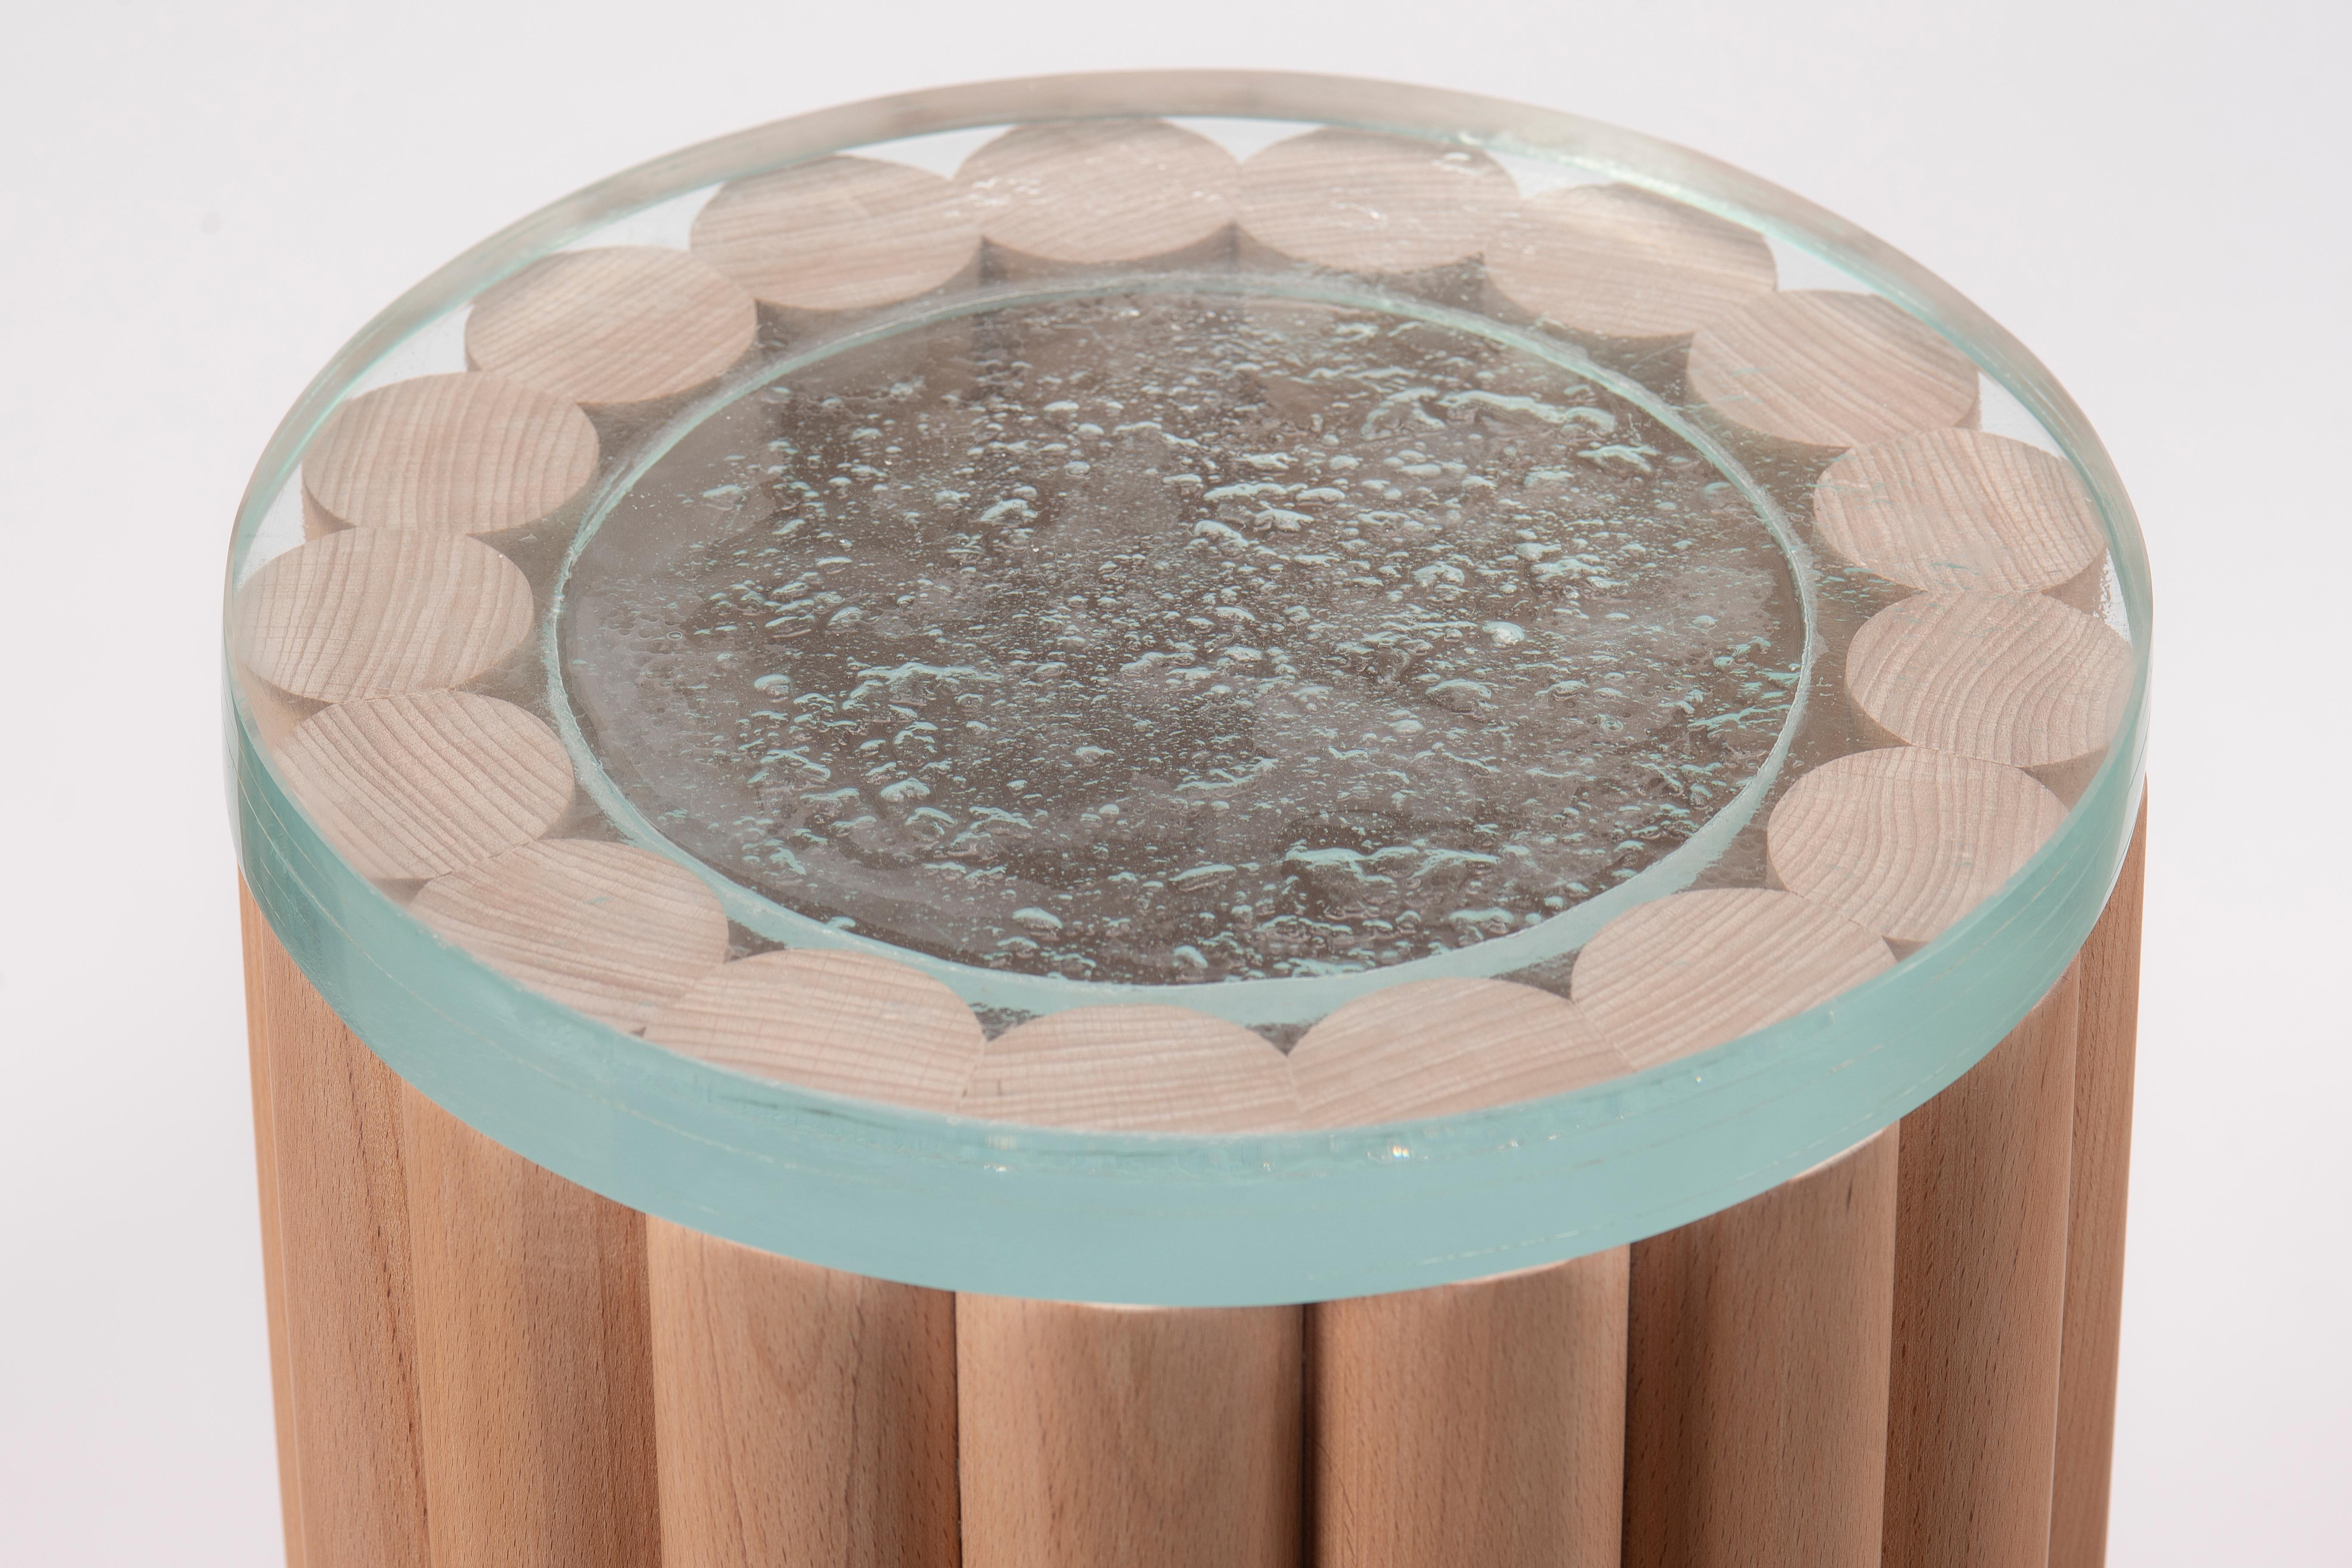 Inspired in the exercise of experimenting with a number of turned rods of wood. Loto side-tables are a simple yet stylish statement, featuring two cylindrical bodies in different diameters and heights and Tlaquepaque molten fused glass tops